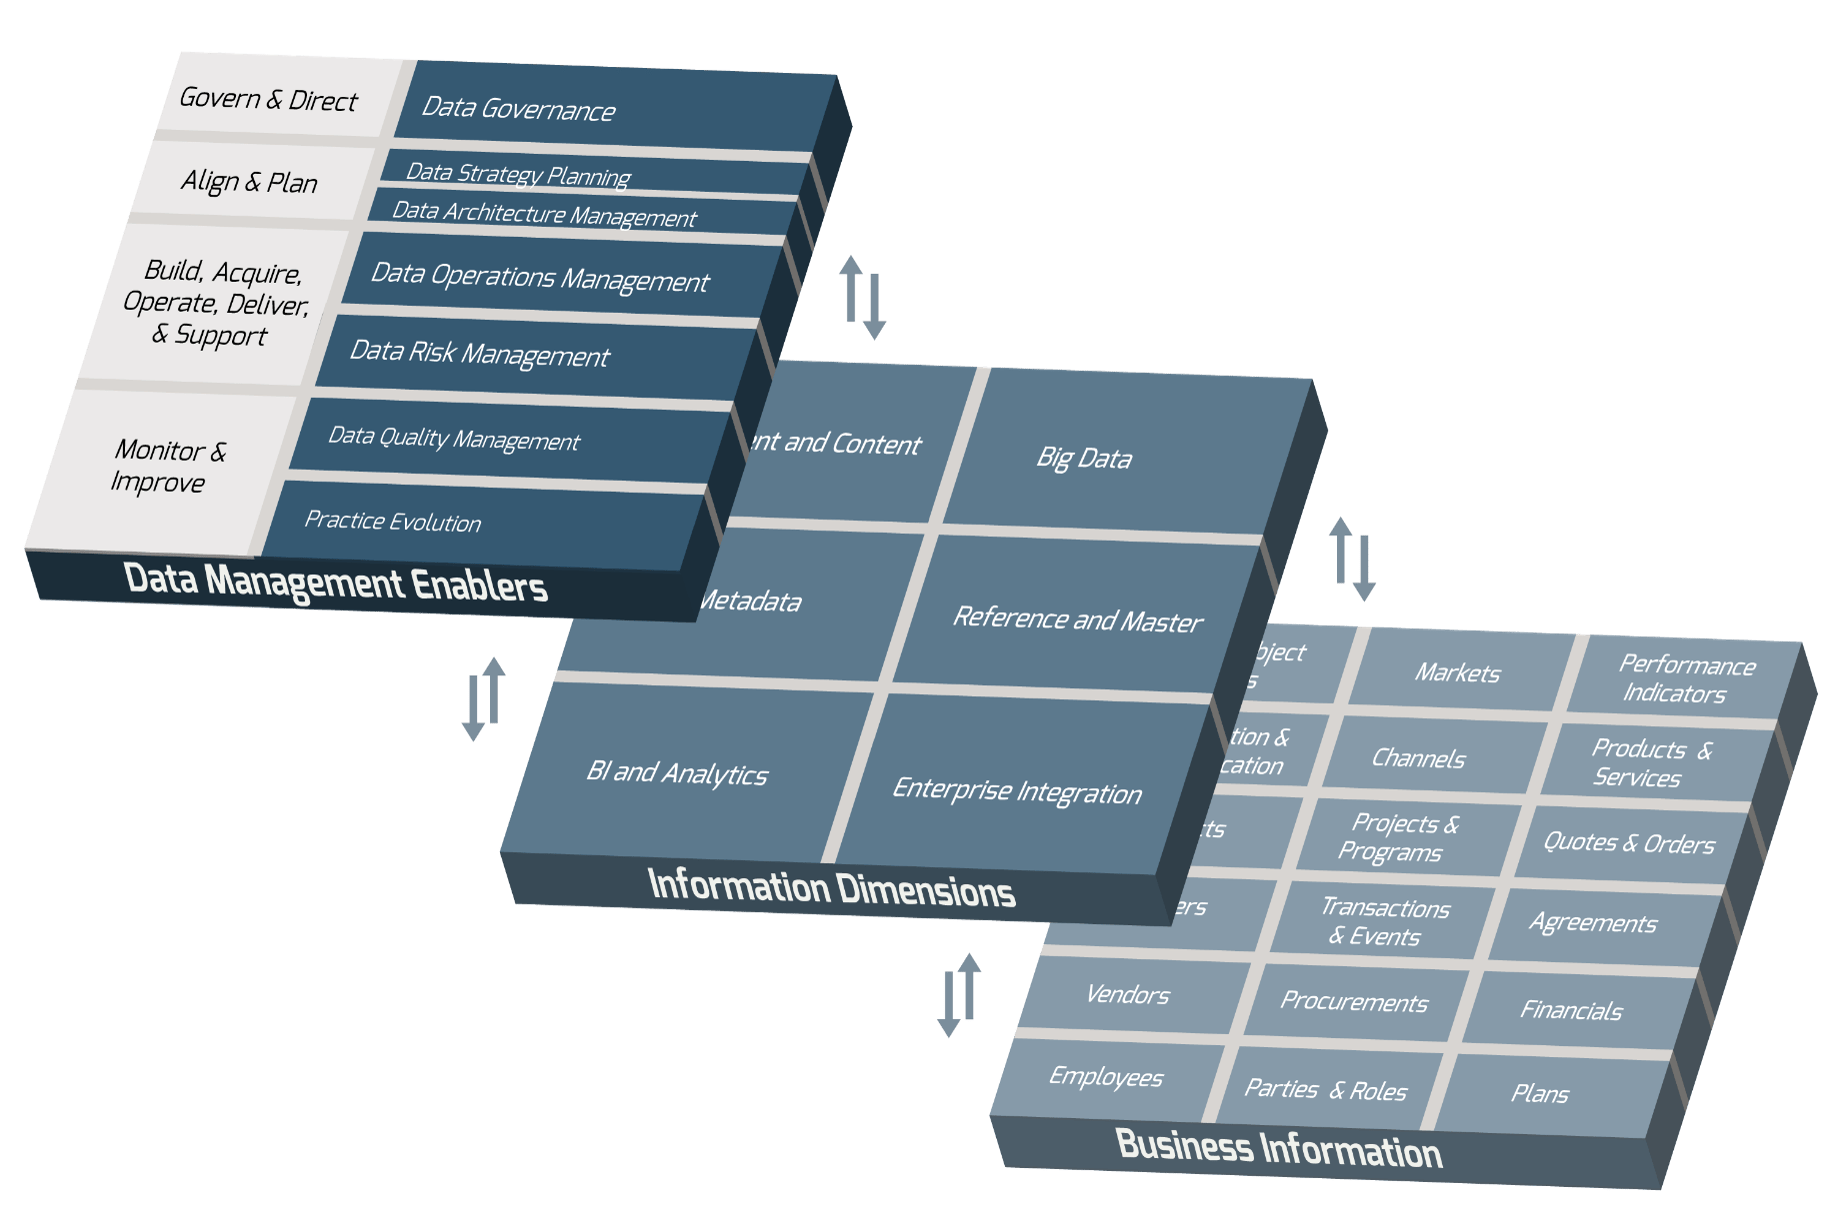 The three-tiered Data Management Framework, tiers are labelled 'Data Management Enablers', 'Information Dimensions', and 'Business Information'.